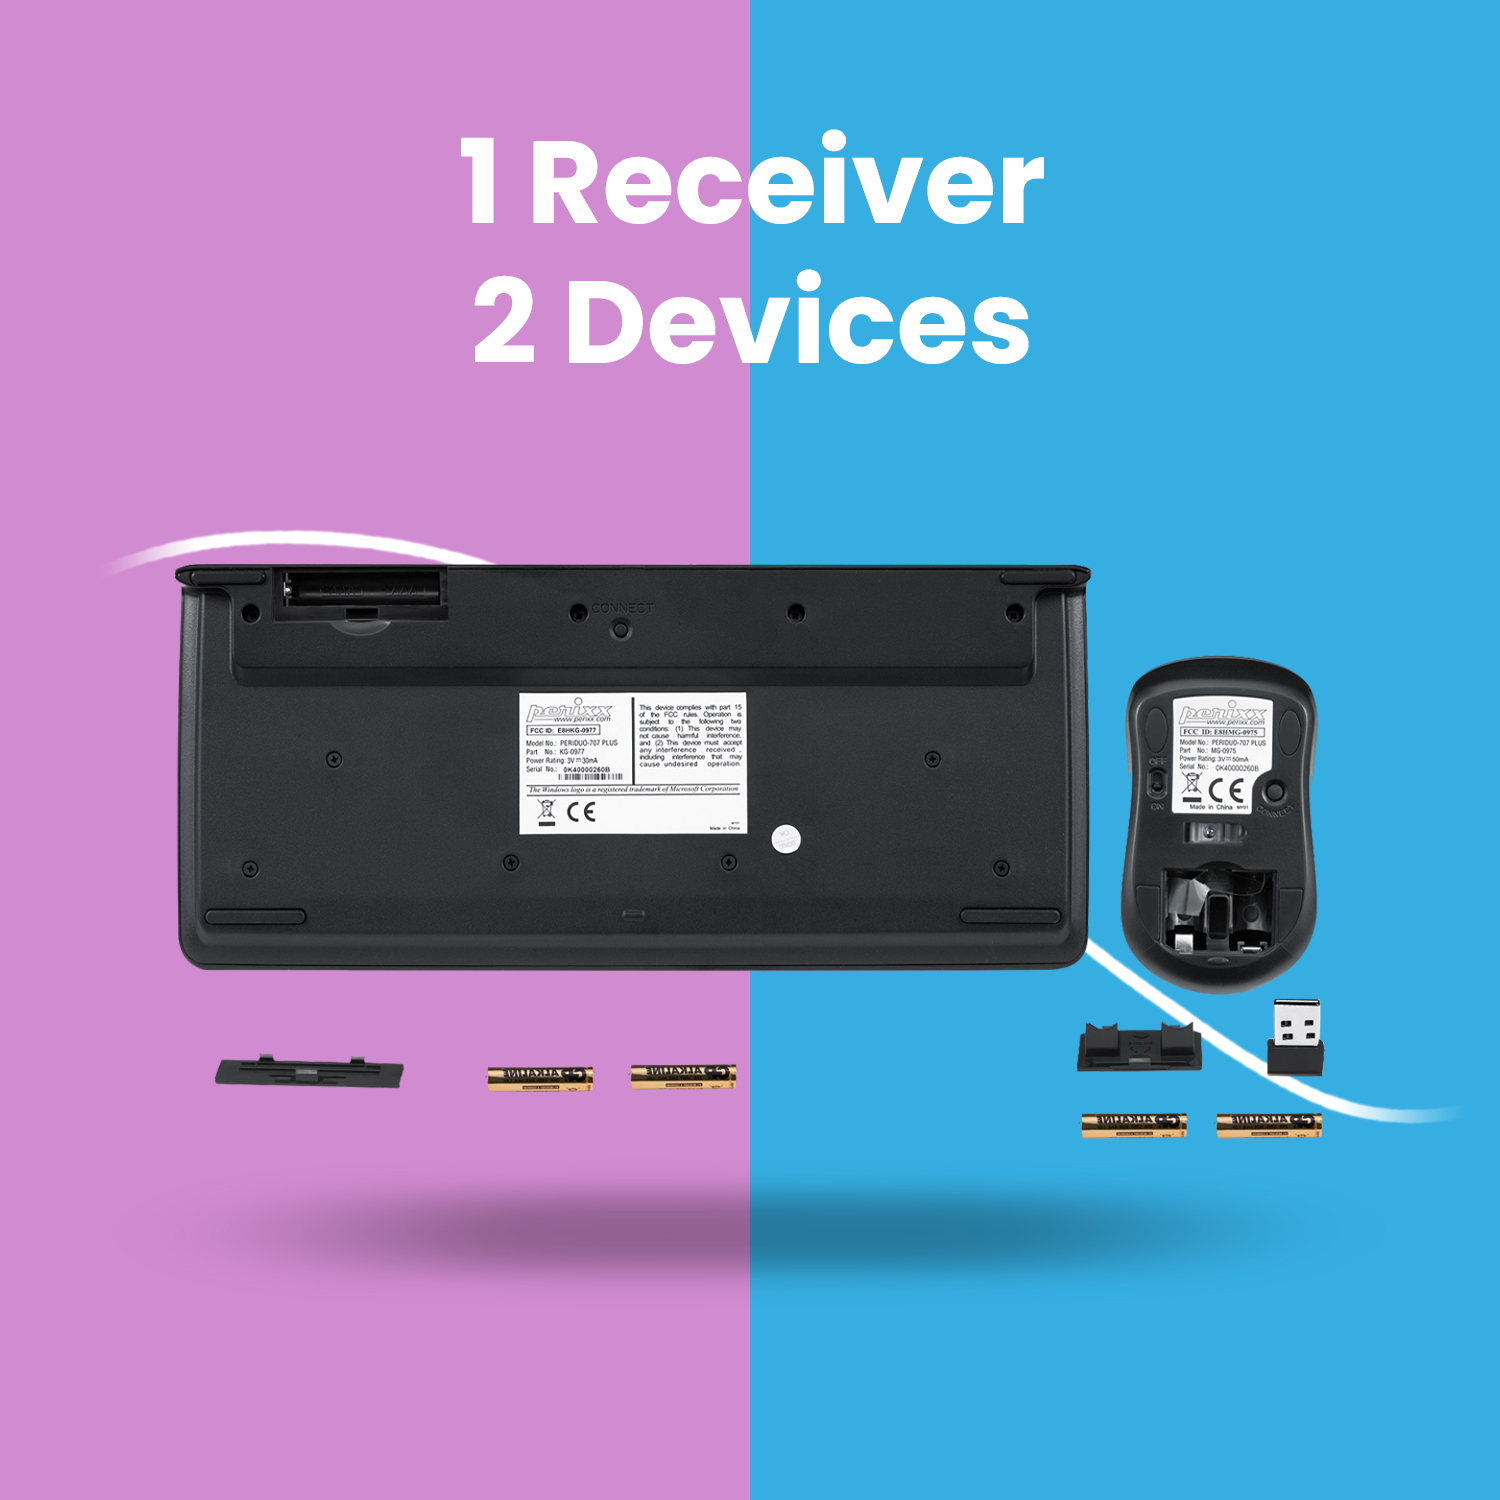 One Receiver for both devices